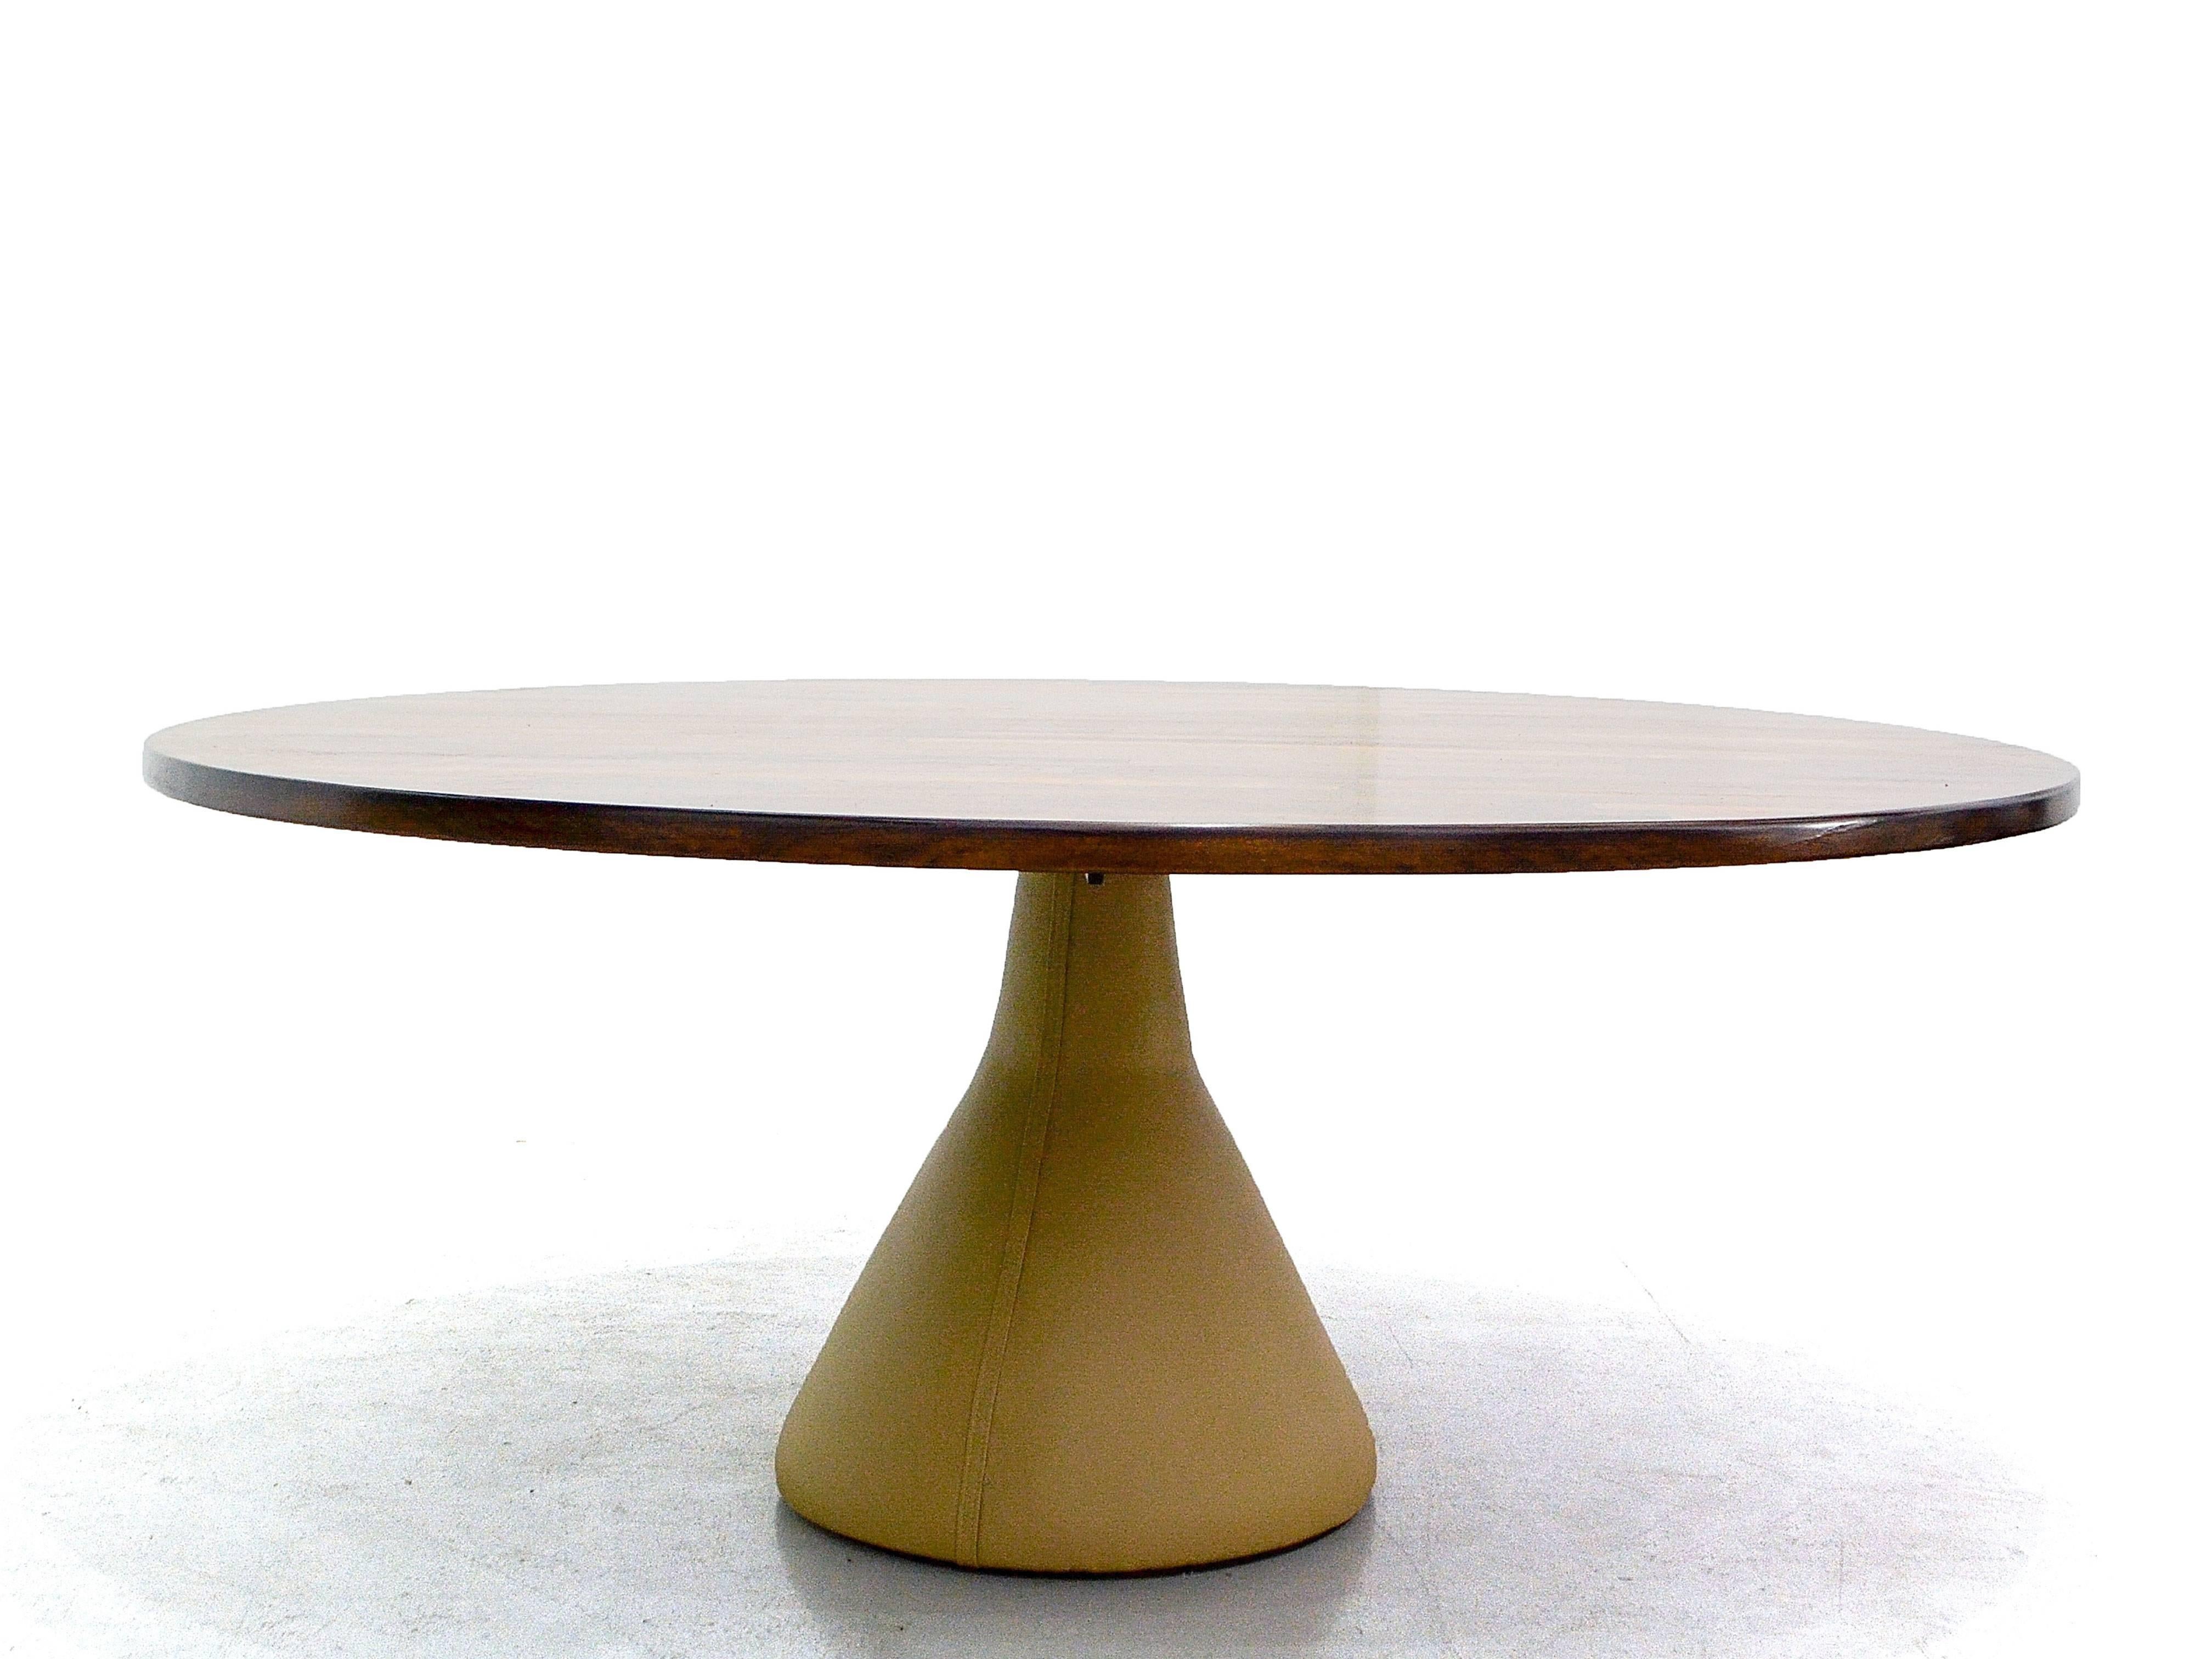 This tabled, named the Guanabara table, was made in the Brazilian Midcentury by Jorge Zalszupin. Originally born in Poland, Jorge Zalszupin built his entire career in Brazil, where he's absorbed many influences for his design, specially the care and